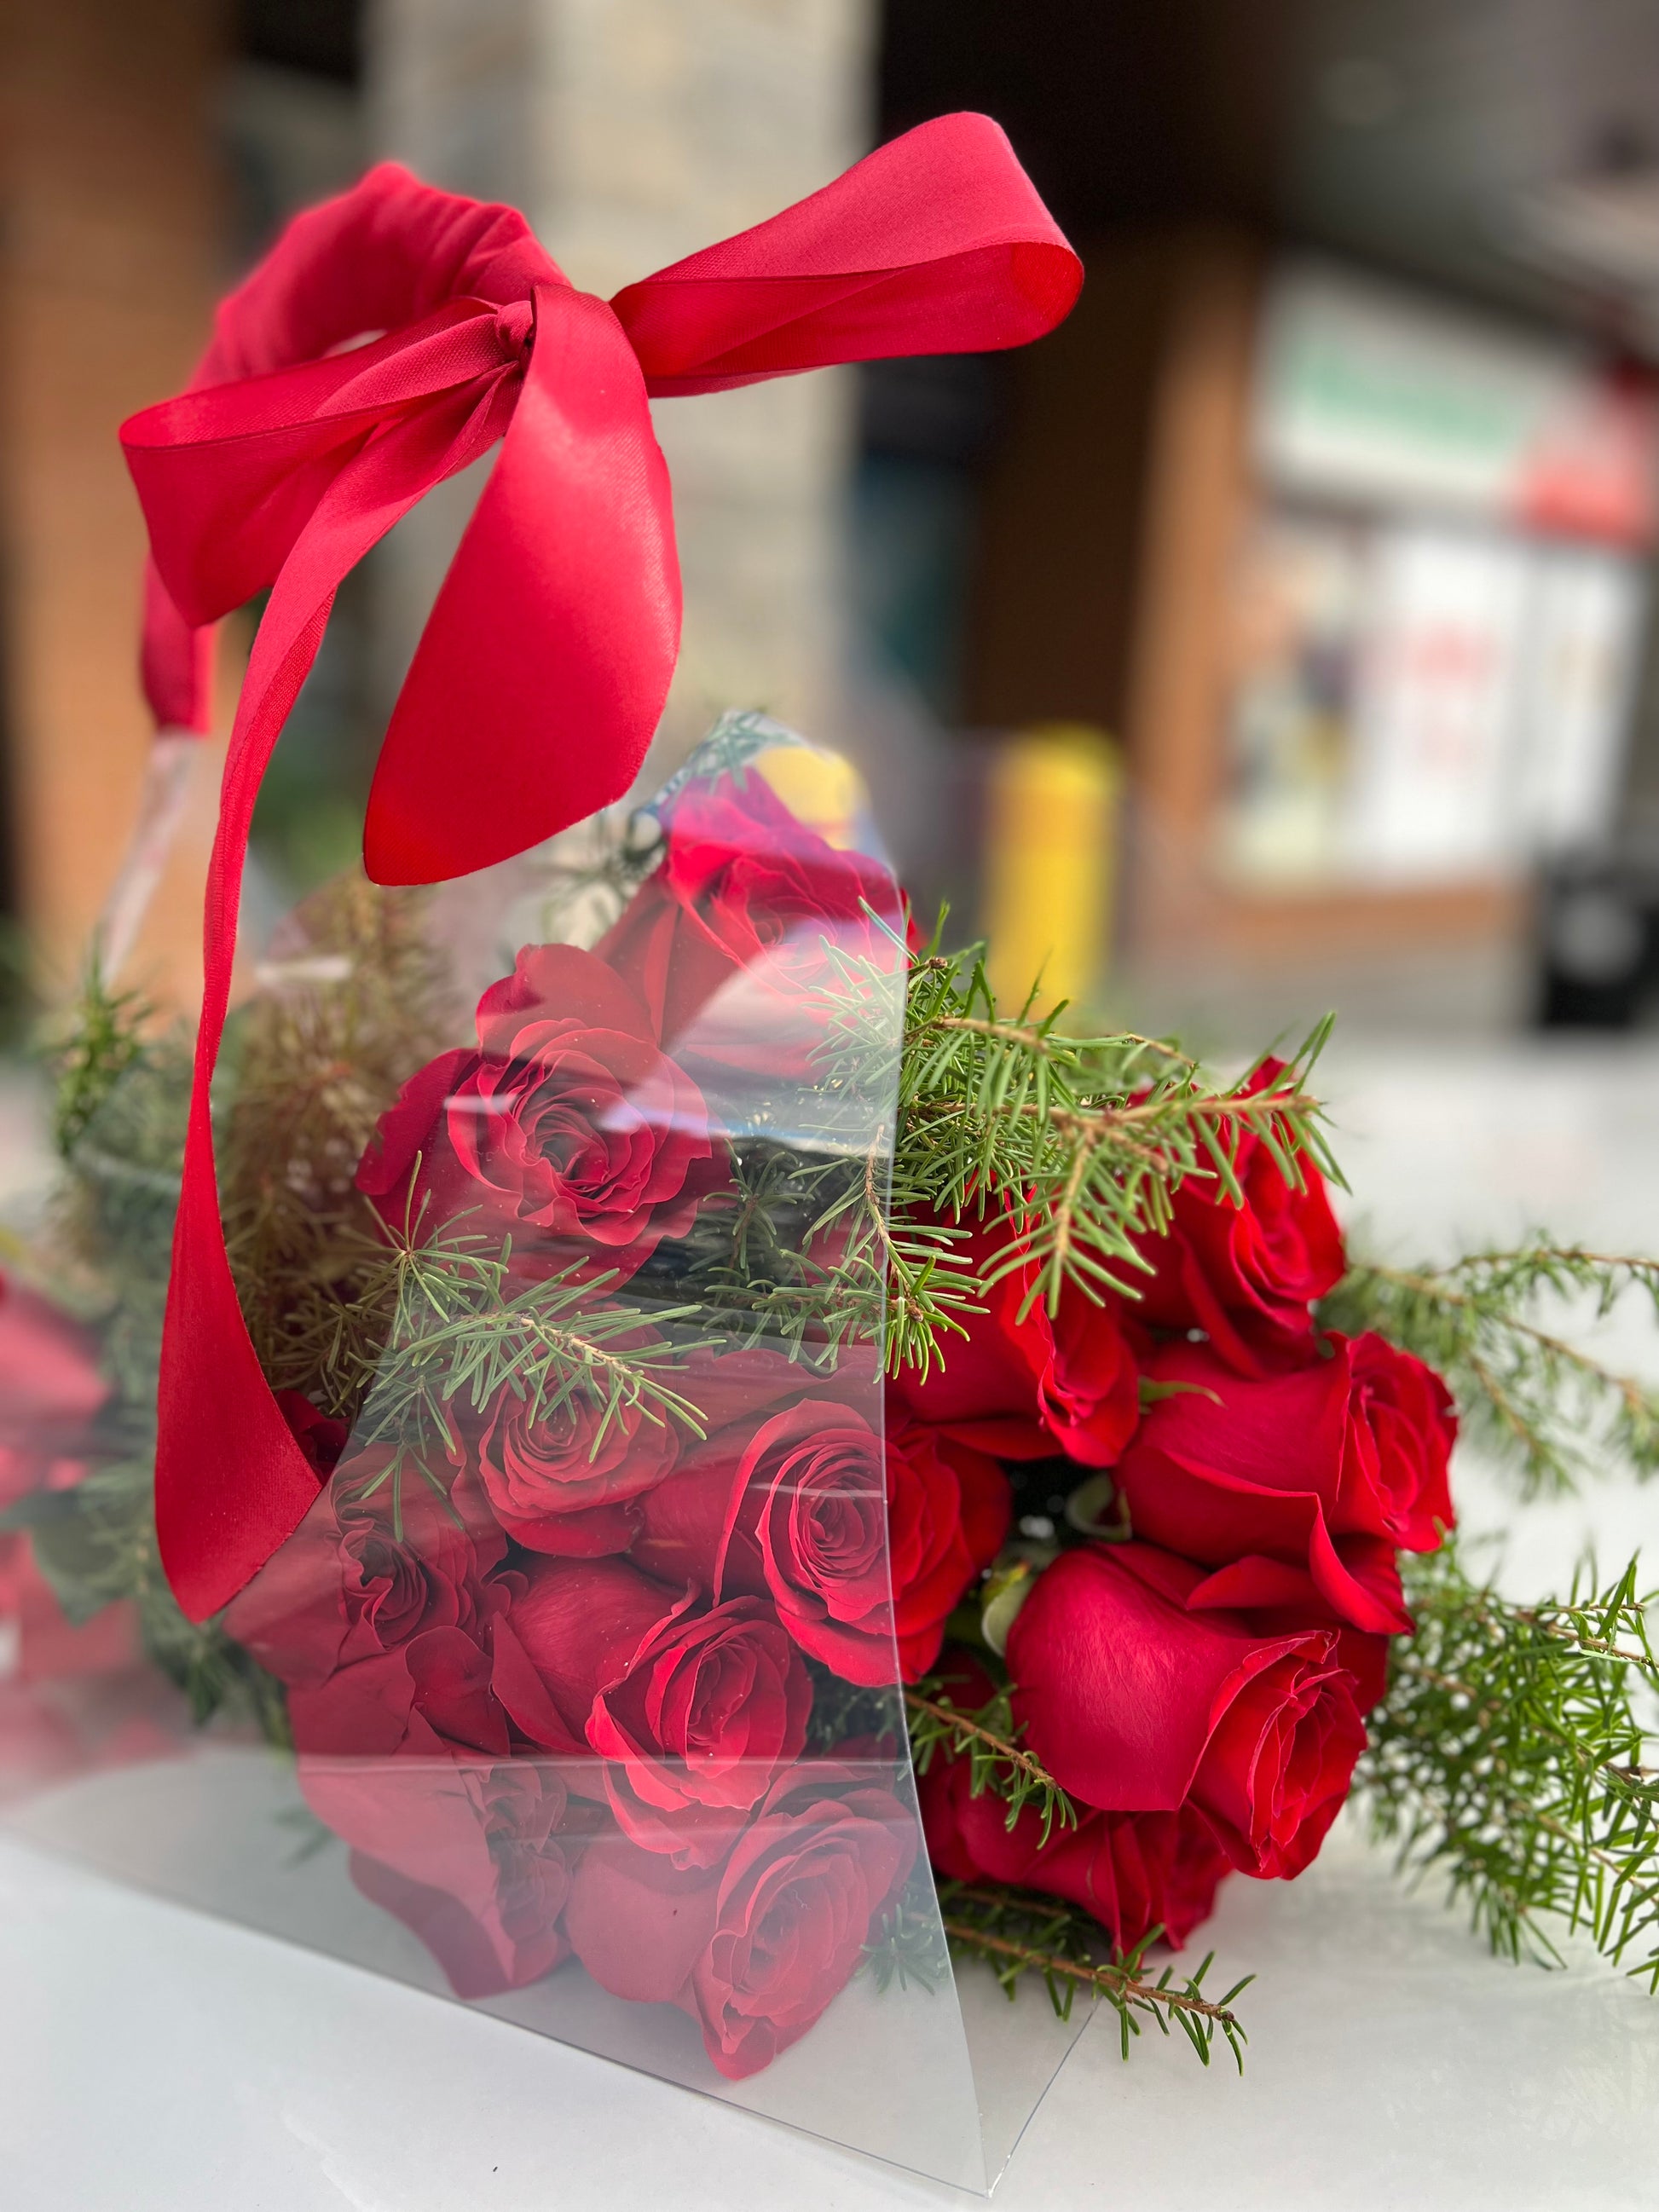 Red Roses in a Bag - Toy Florist